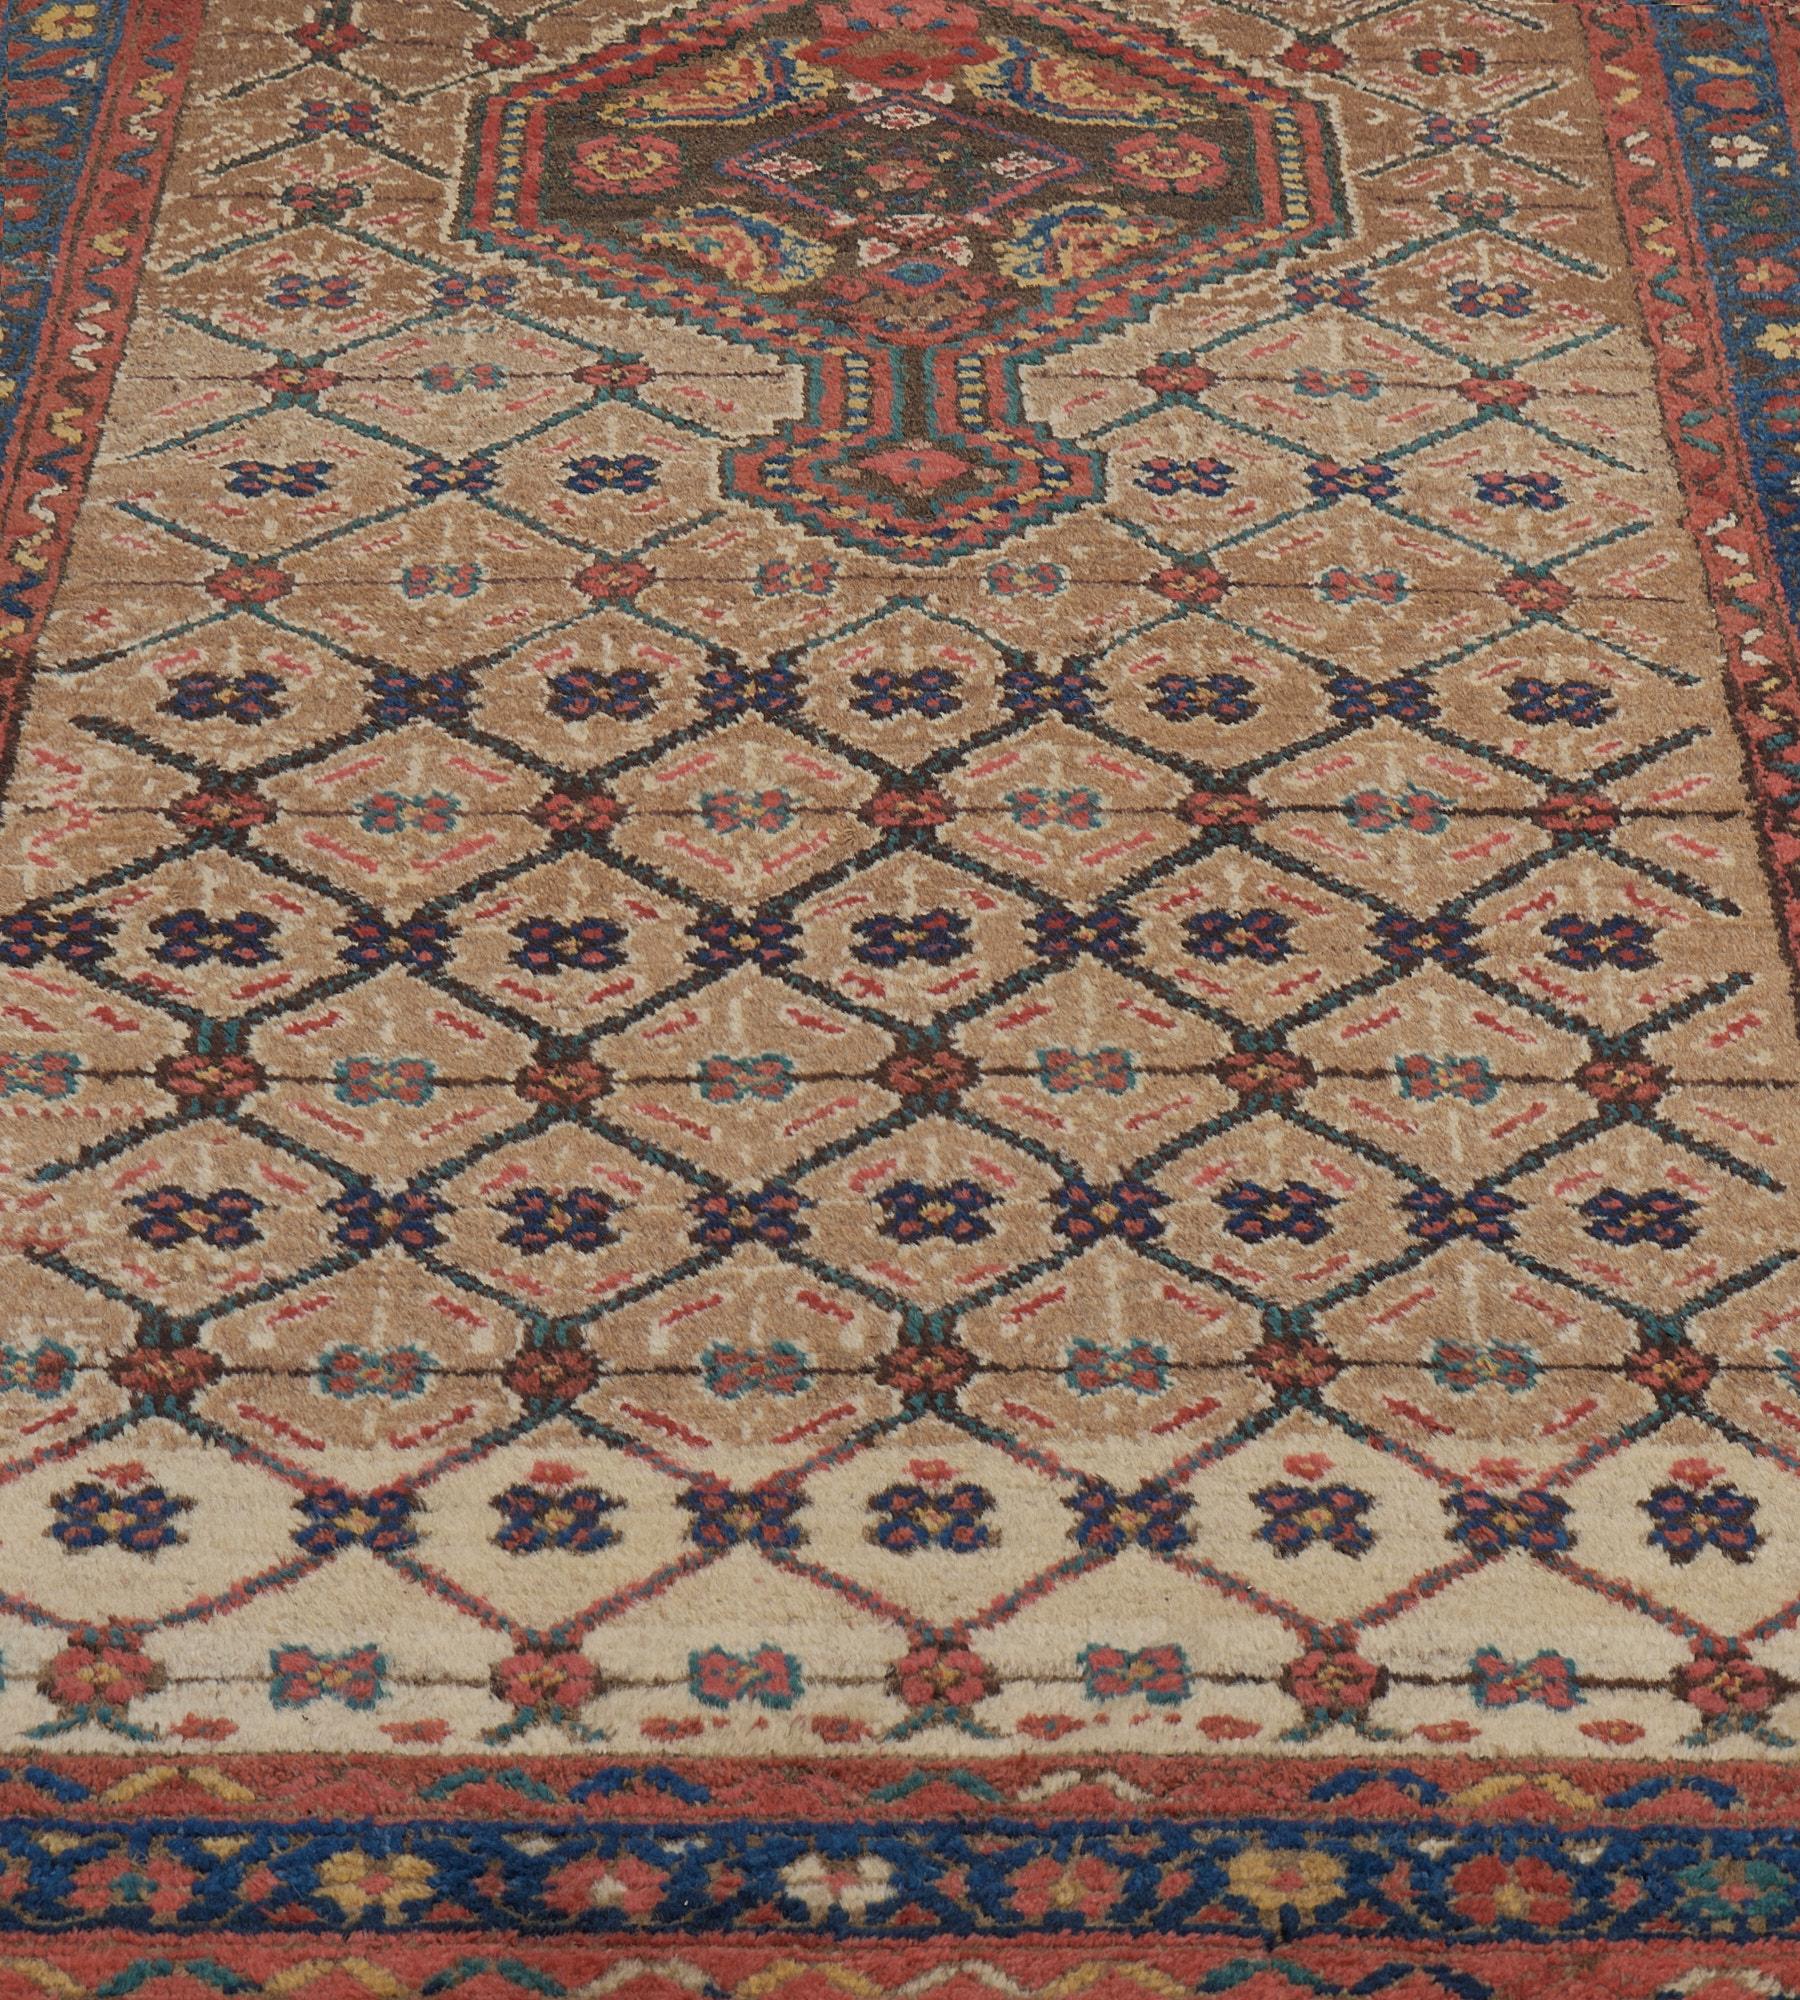 This antique, circa 1900, Persian Serab Runner has a camel-brown field with a light-blue lozenge lattice linked by a tiny flowerhead each lozenge enclosing a delicate polychrome floral motif, around a central chocolate-brown serrated lozenge with